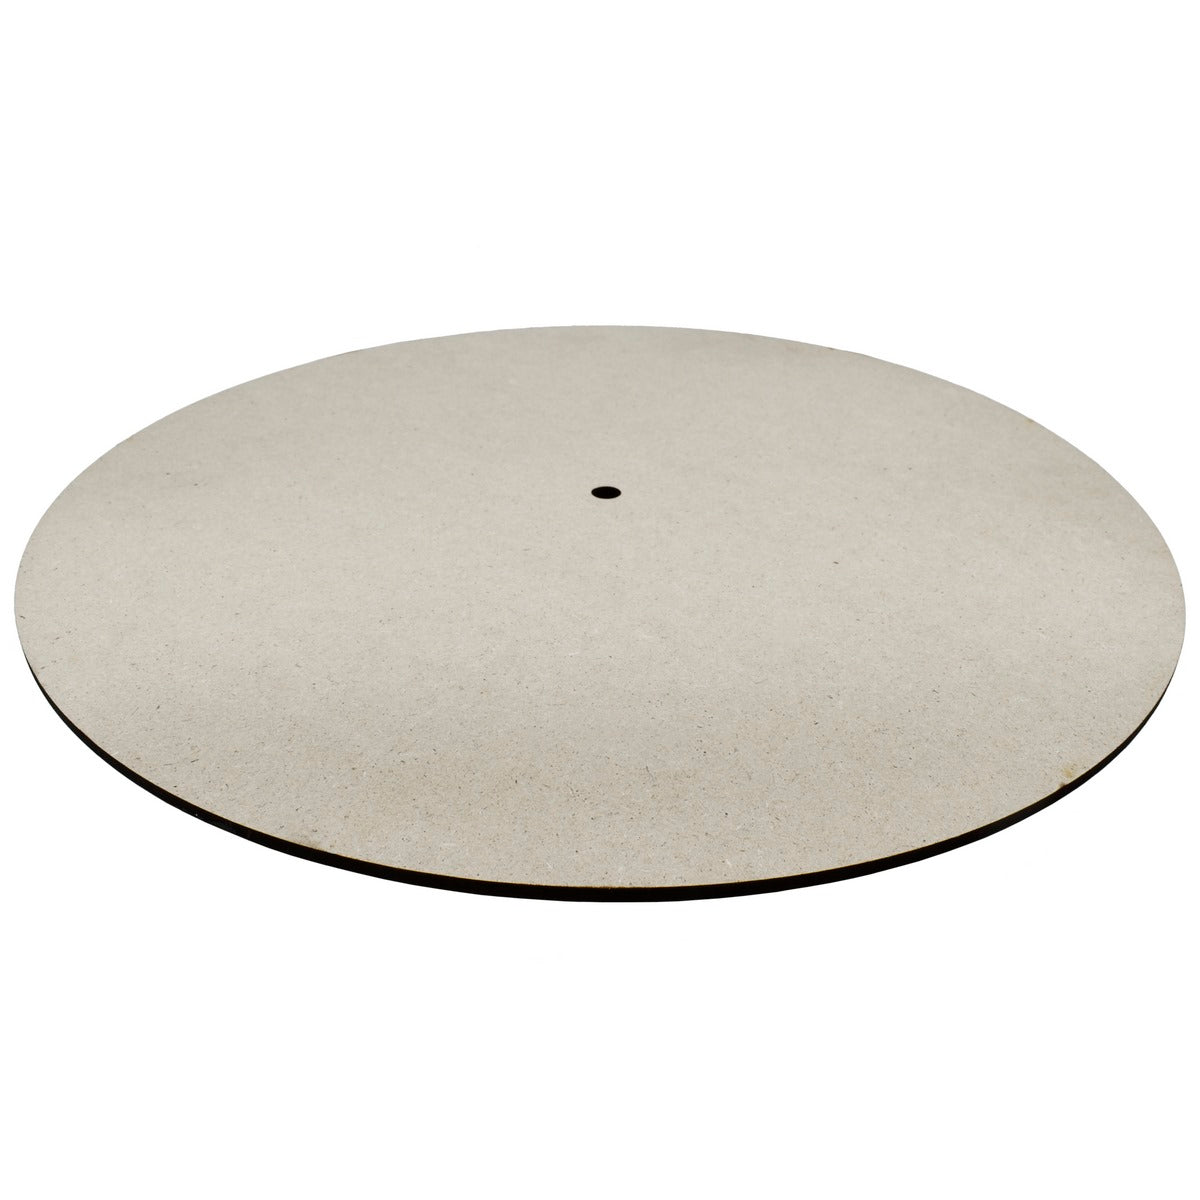 jags-mumbai MDF MDF Plate Round with hole 12 Inch 4mm MPRW01